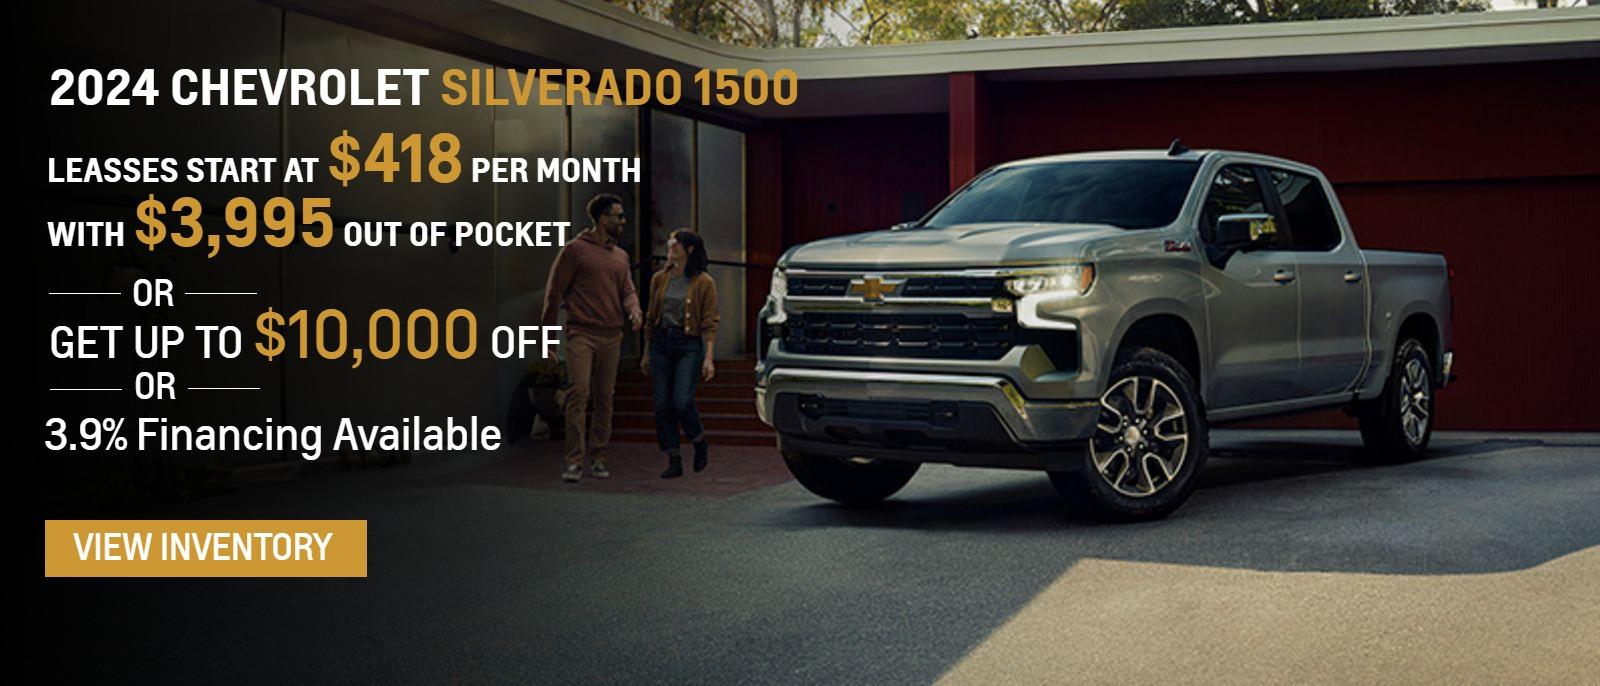 2024 CHEVROLET SILVERADO 1500
LEASSES START AT $418 PER MONTH WITH $3995 OUT OF POCKET ***
GET UP TO $10,000 OFF *
3.9% FINANCING AVAILABLE**